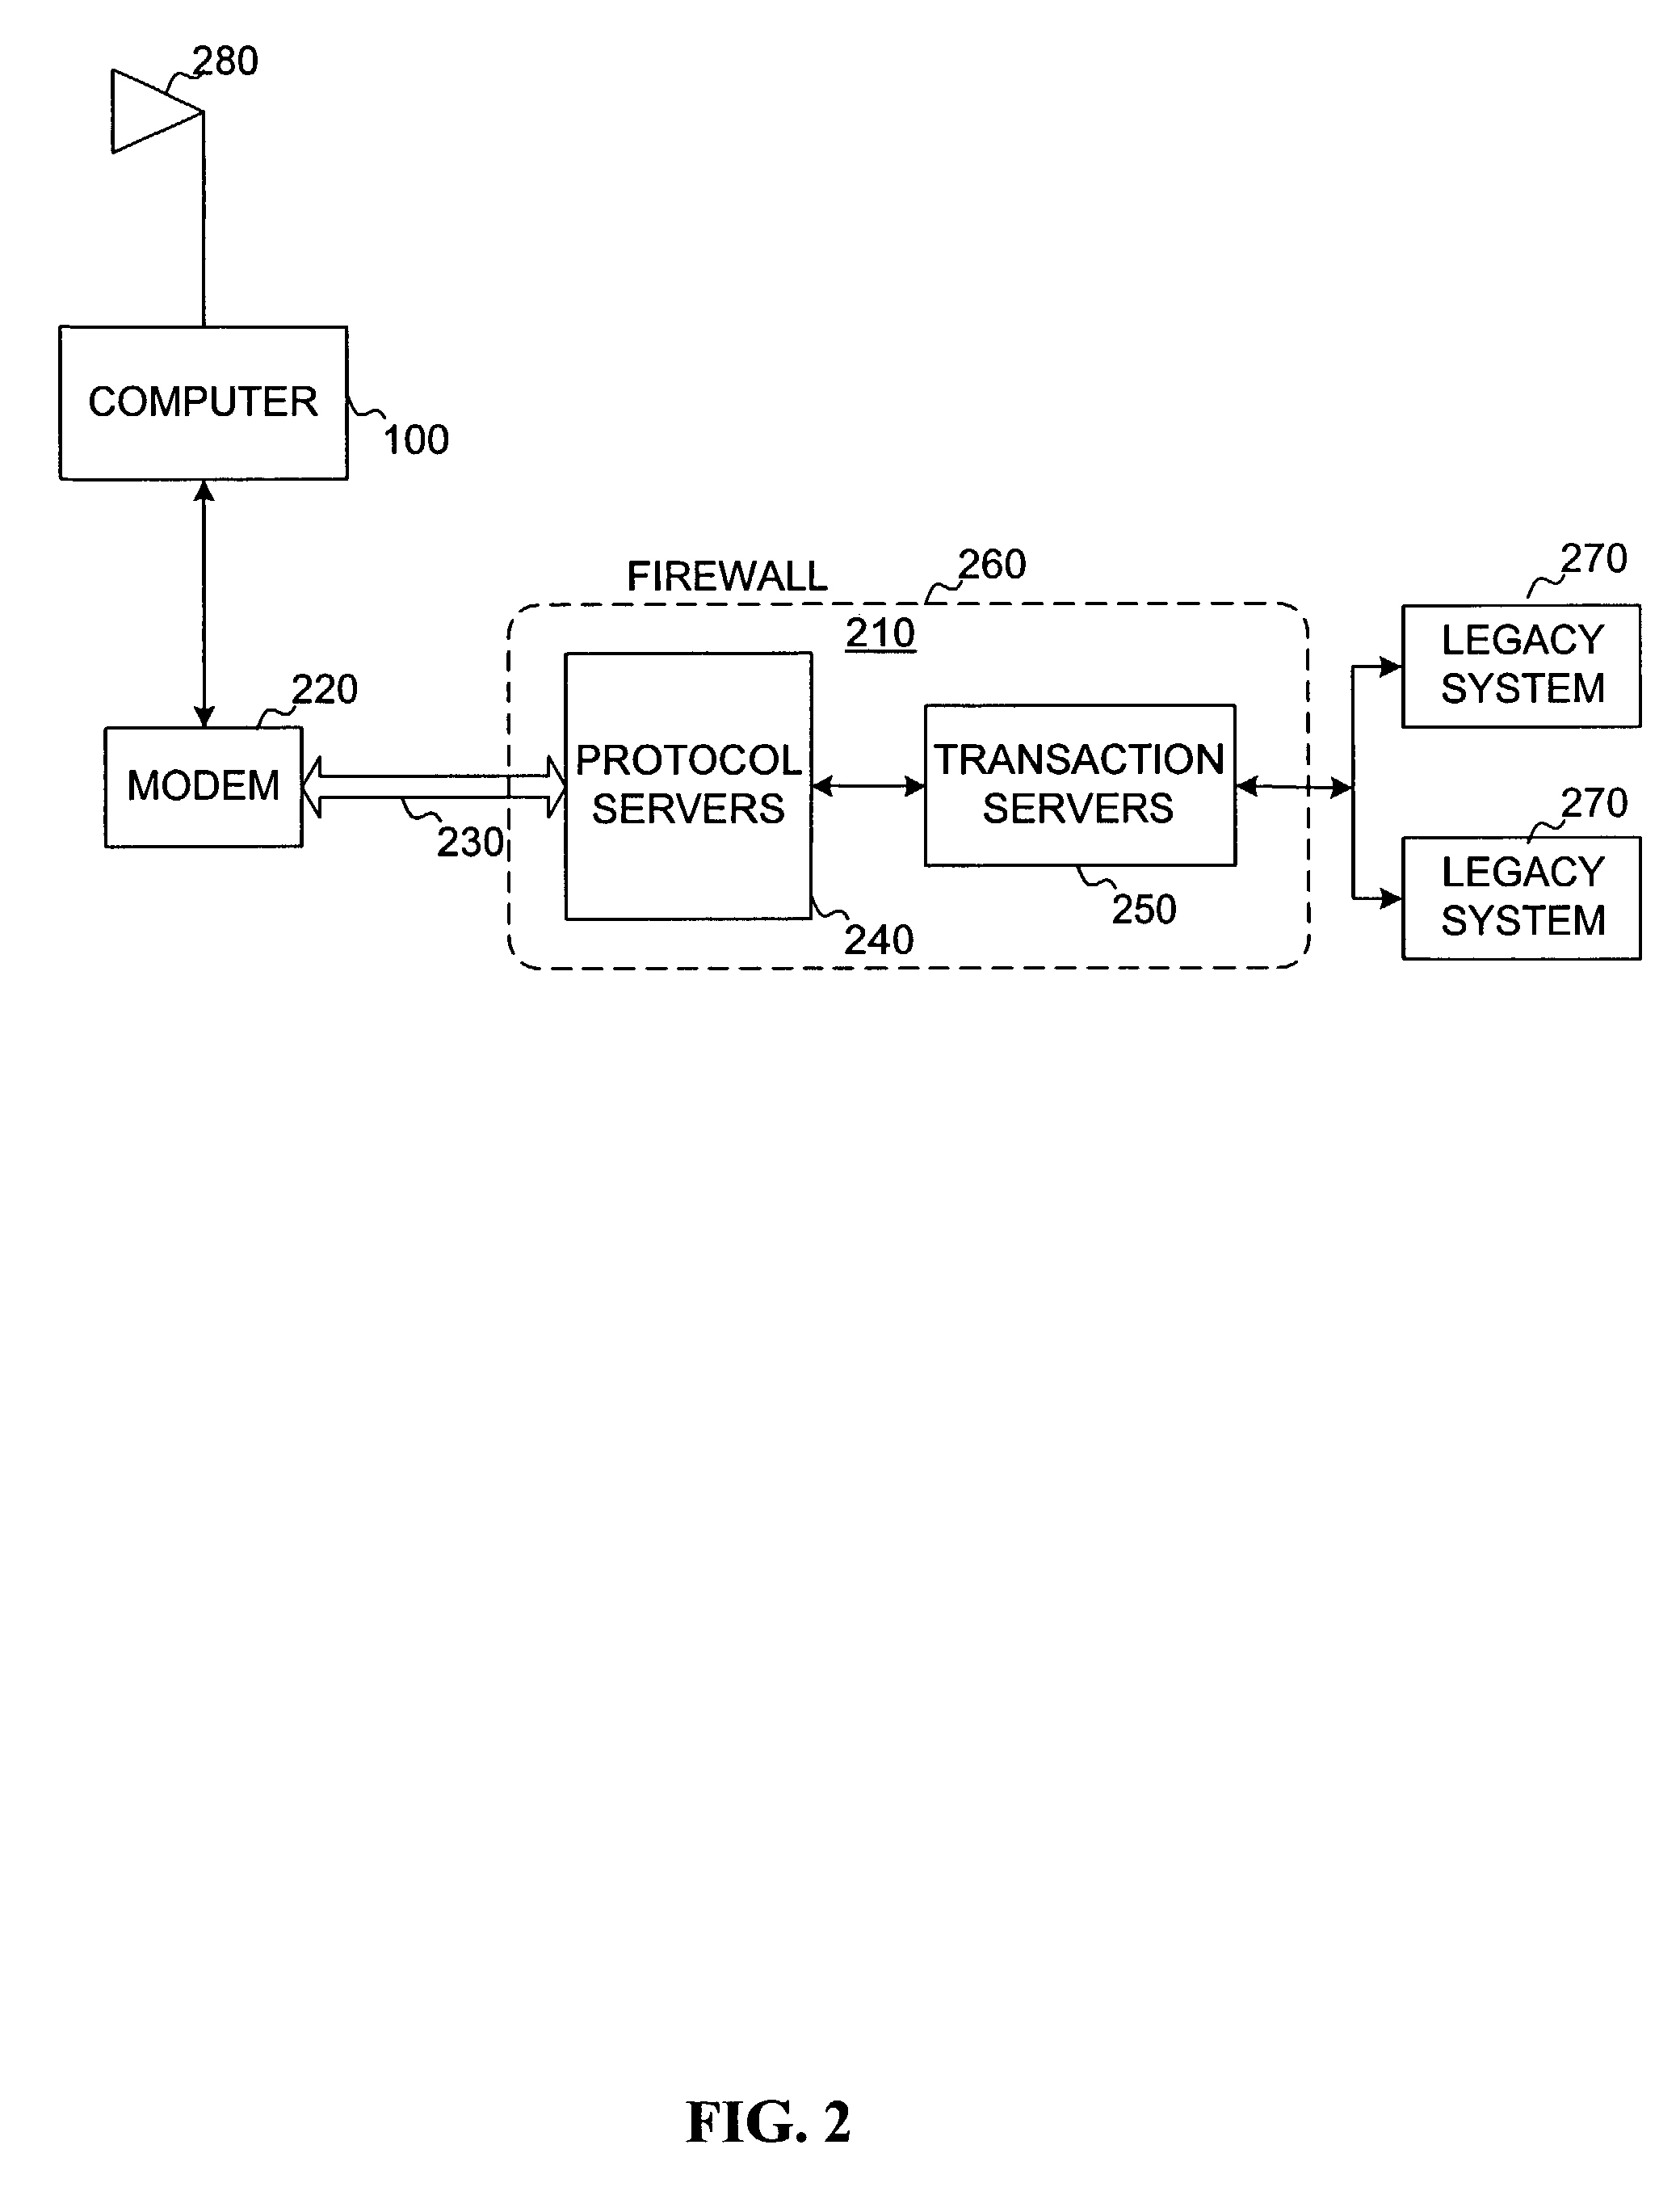 Speech recognition interface for voice actuation of legacy systems